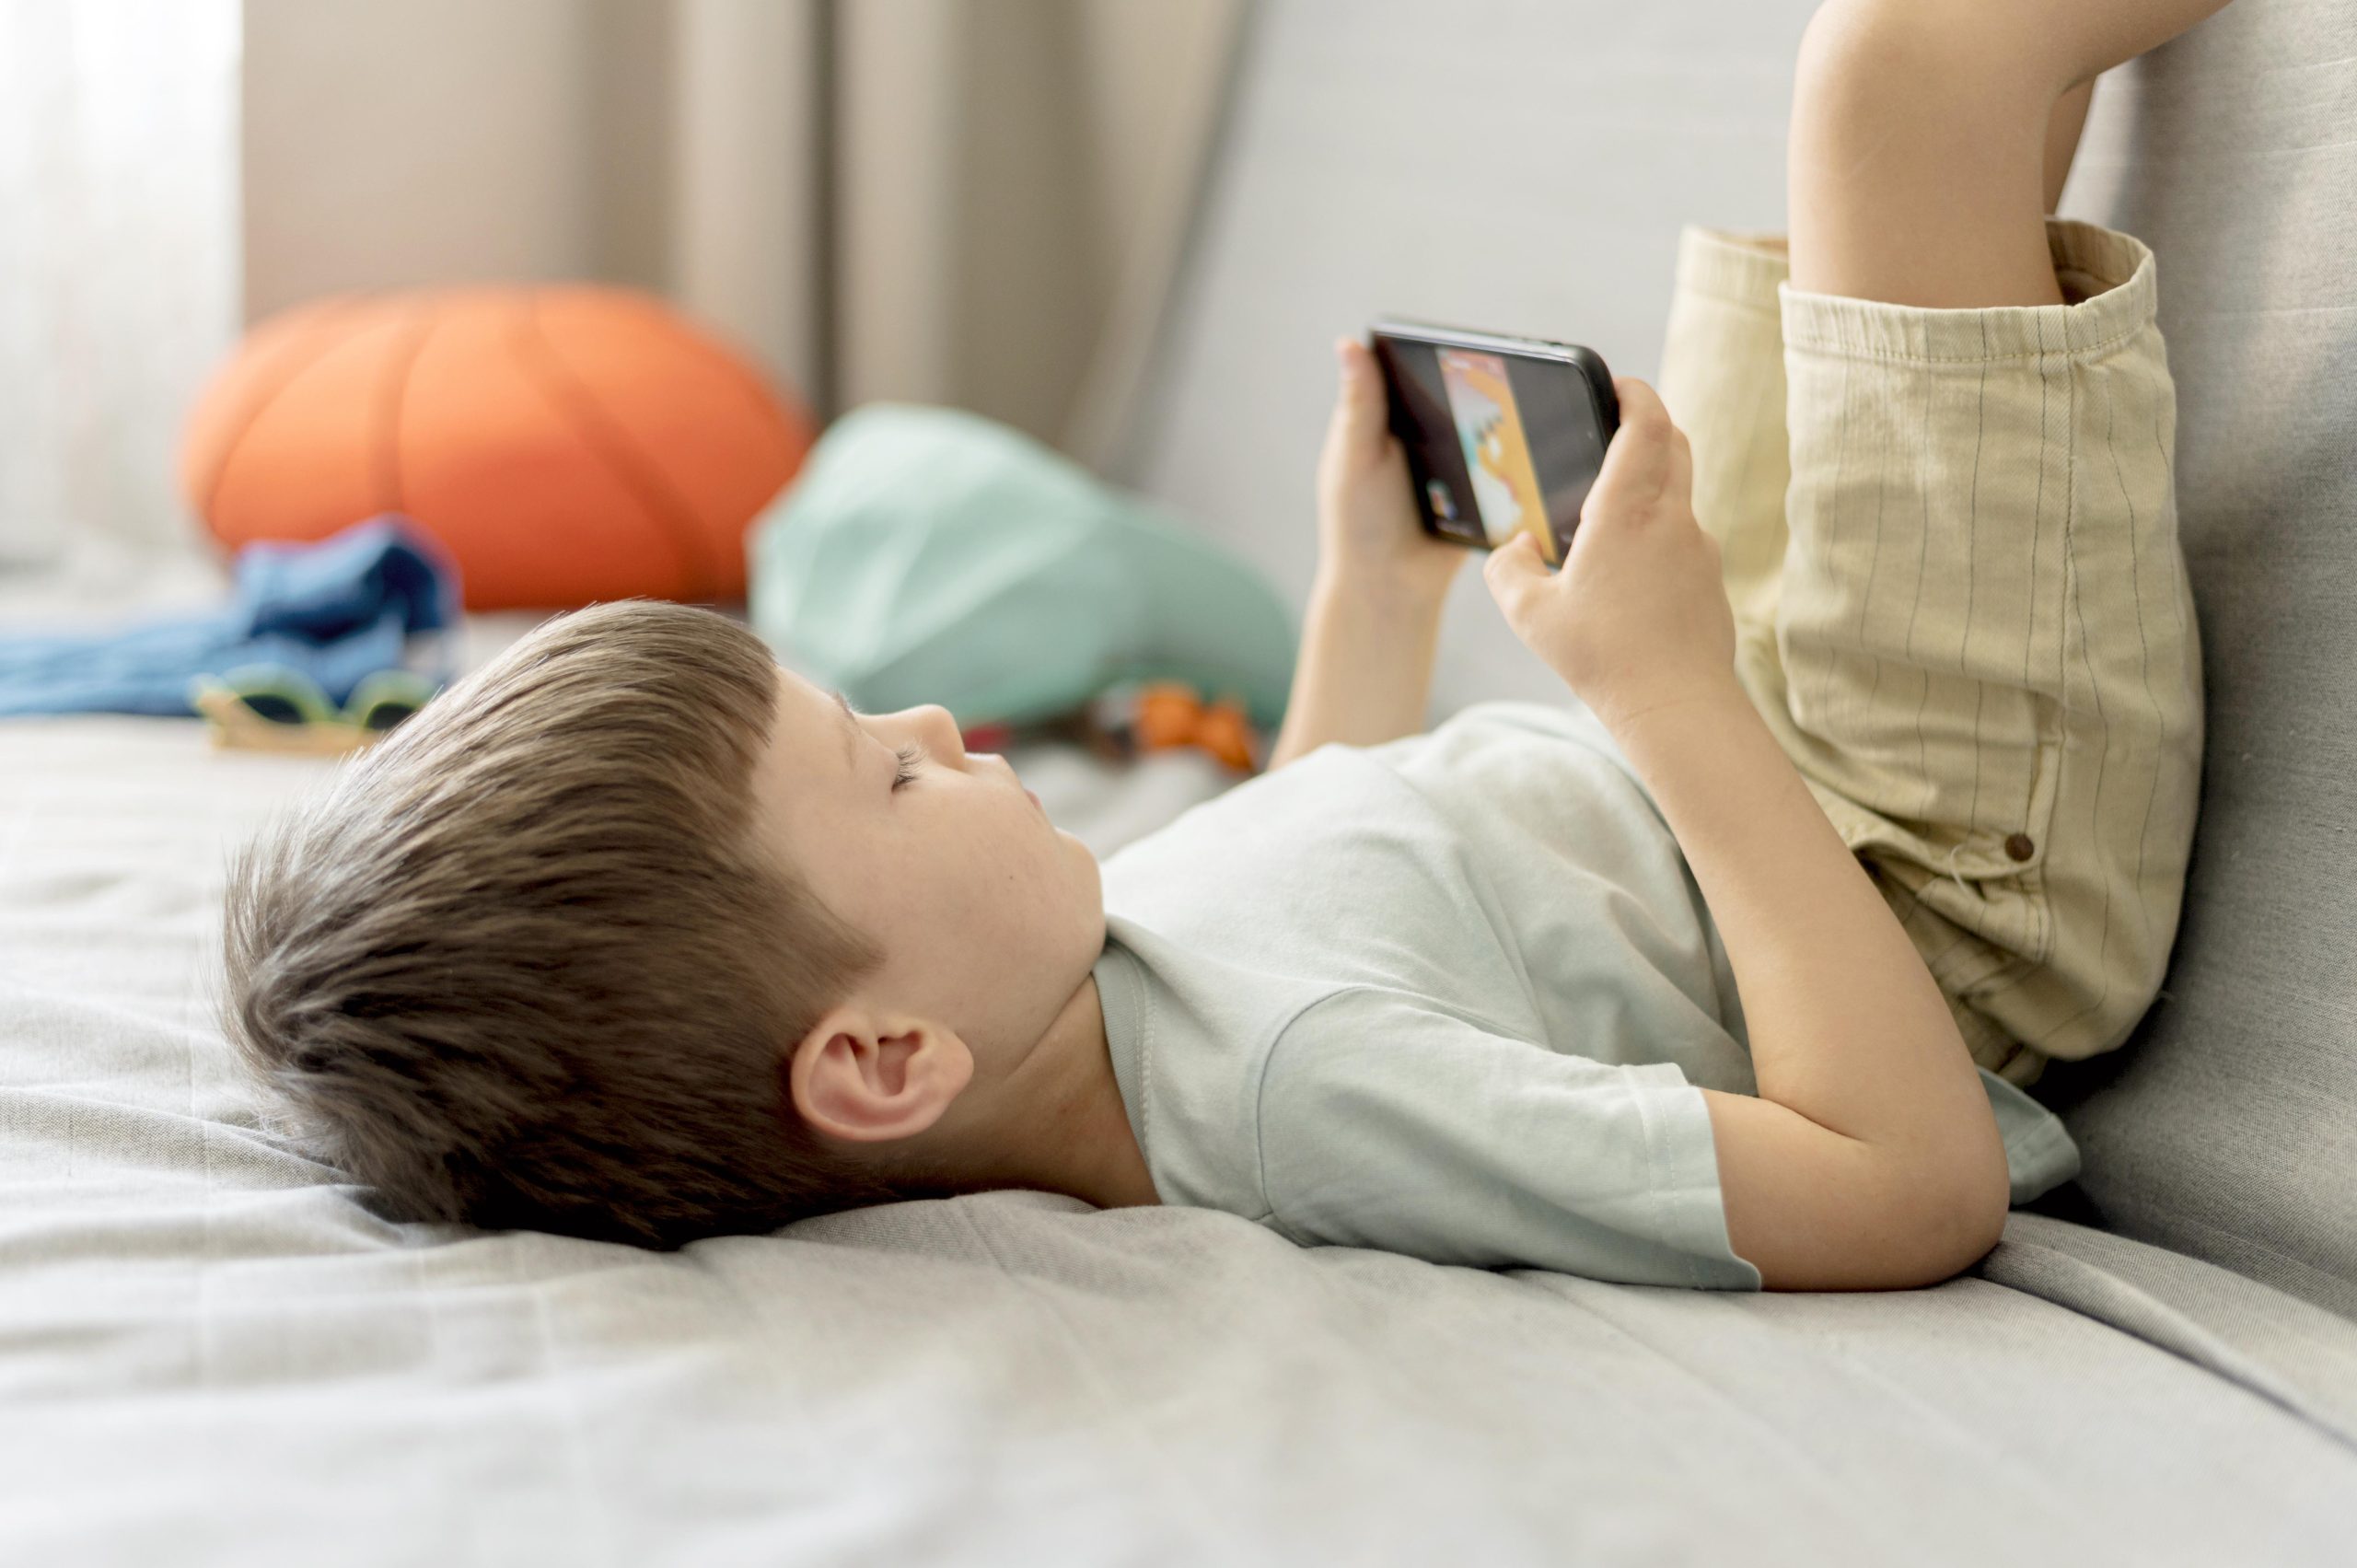 Promoting Digital Well-being: Tips for Balancing TikTok and Real Life for Your Child